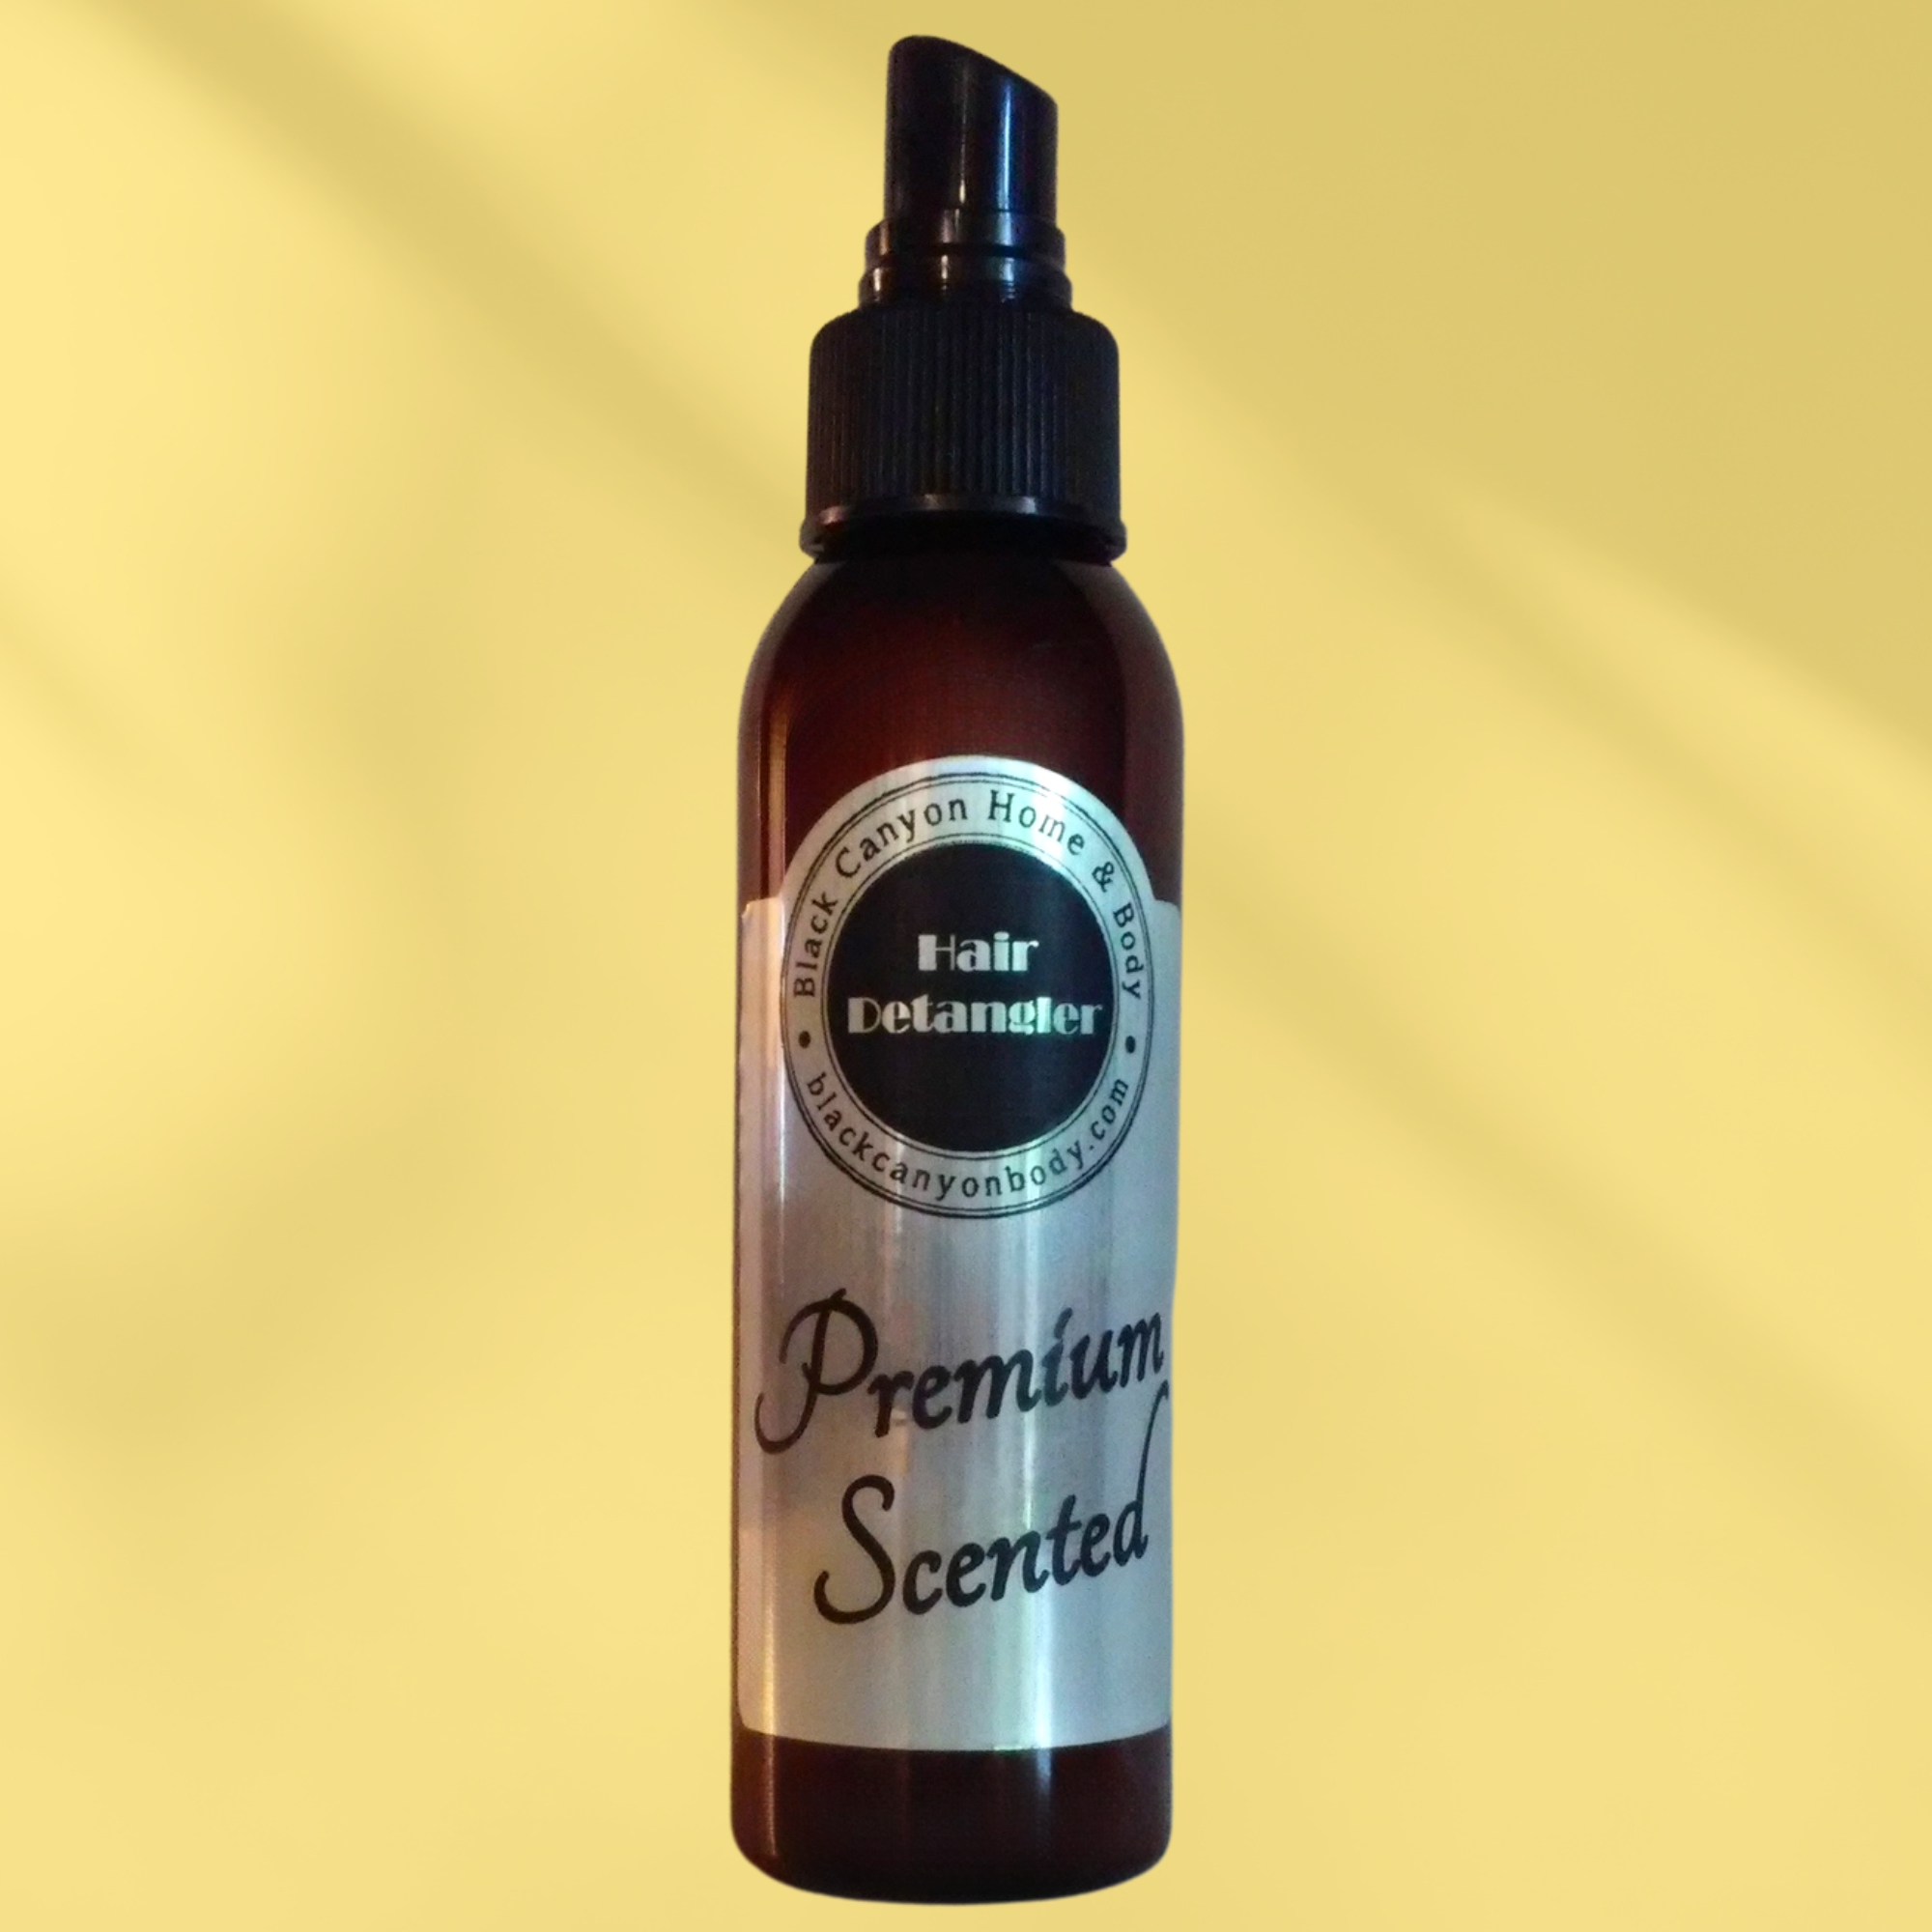 Black Canyon Amber Cherry Scented Hair Detangler Spray with Olive Oil